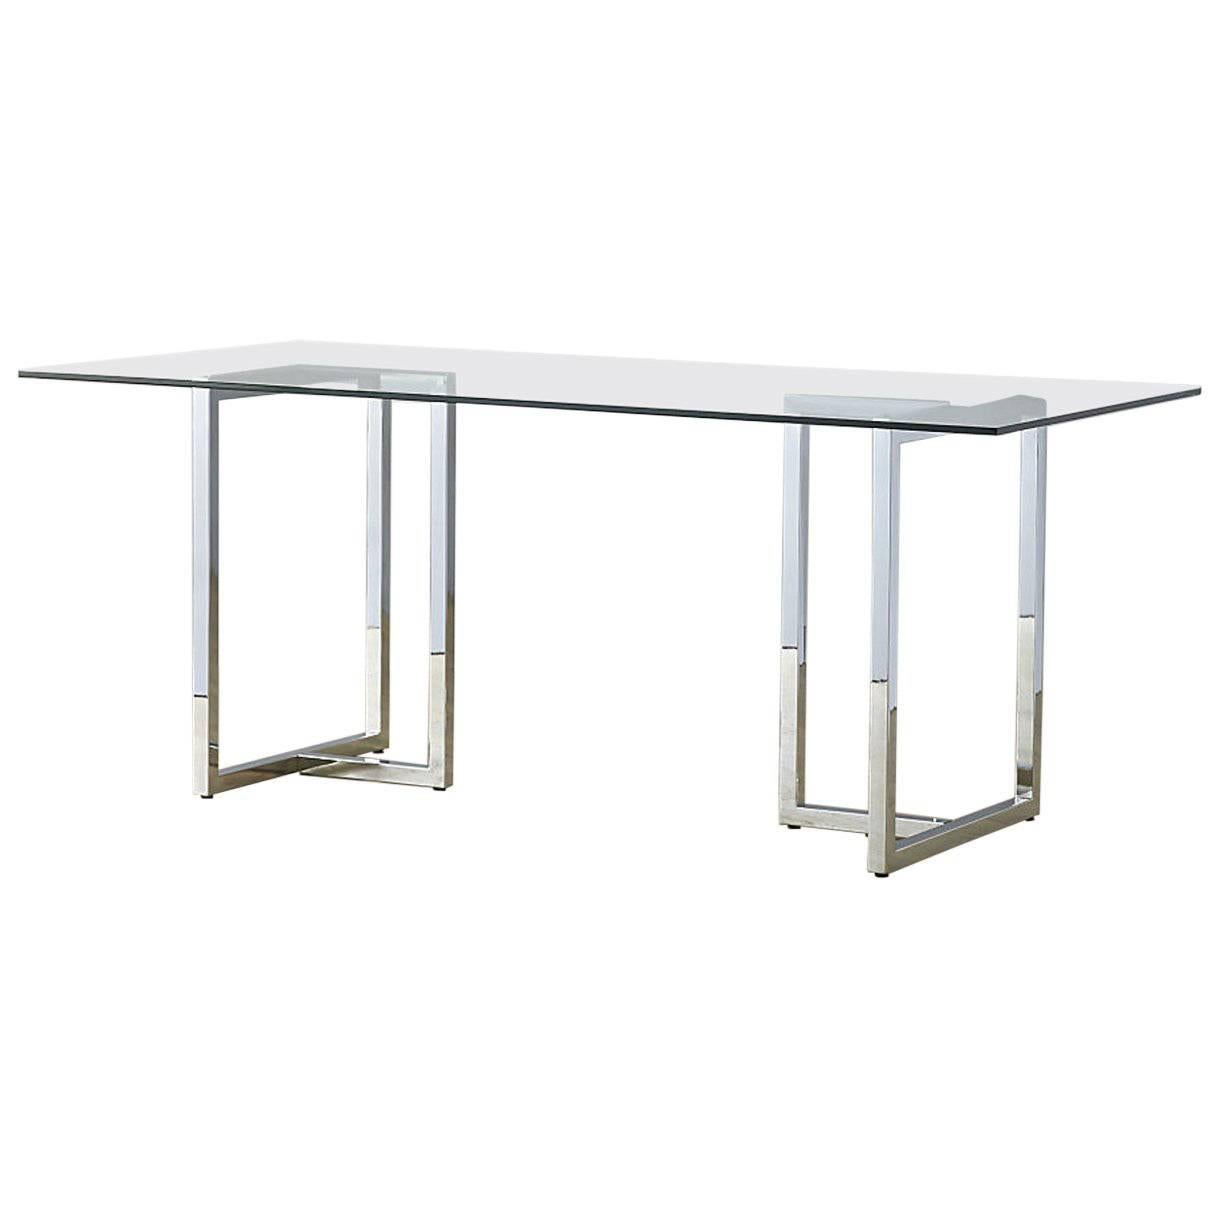 Chrome and Glass Dinning Table or Desk